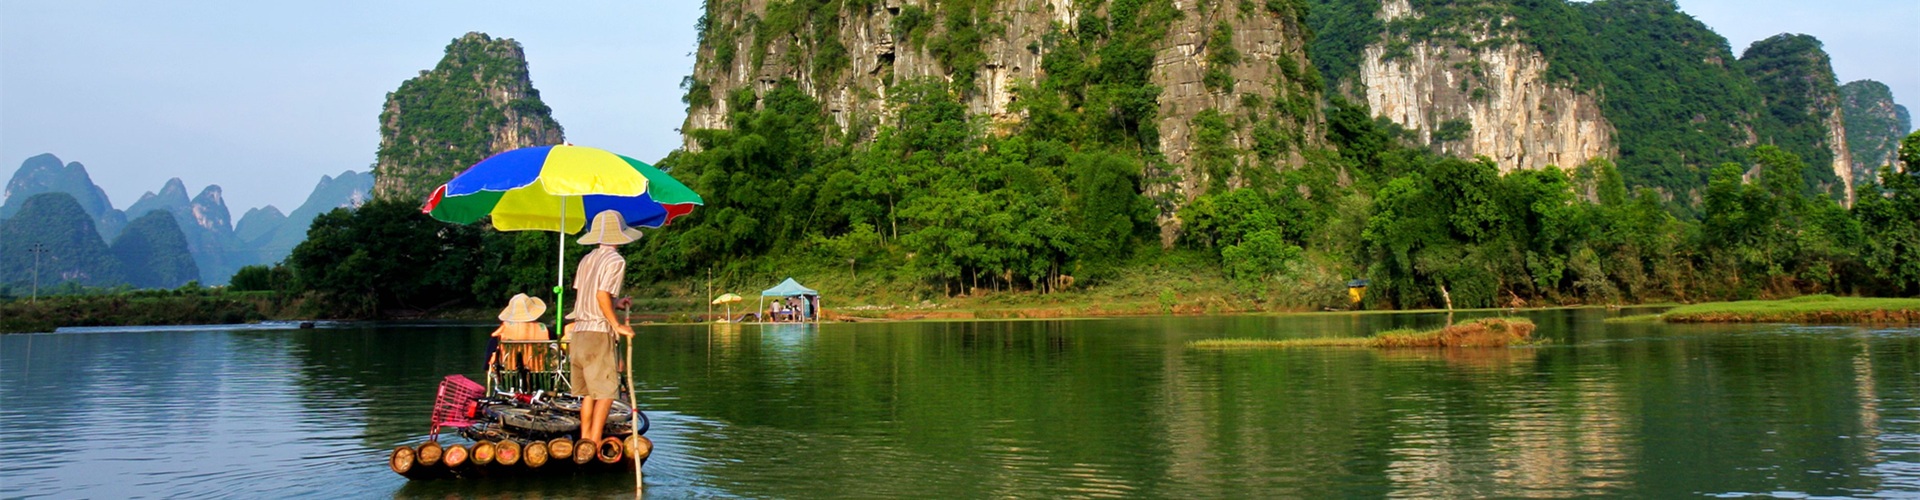 Bamboo Rafts - Get Closer to the Li River